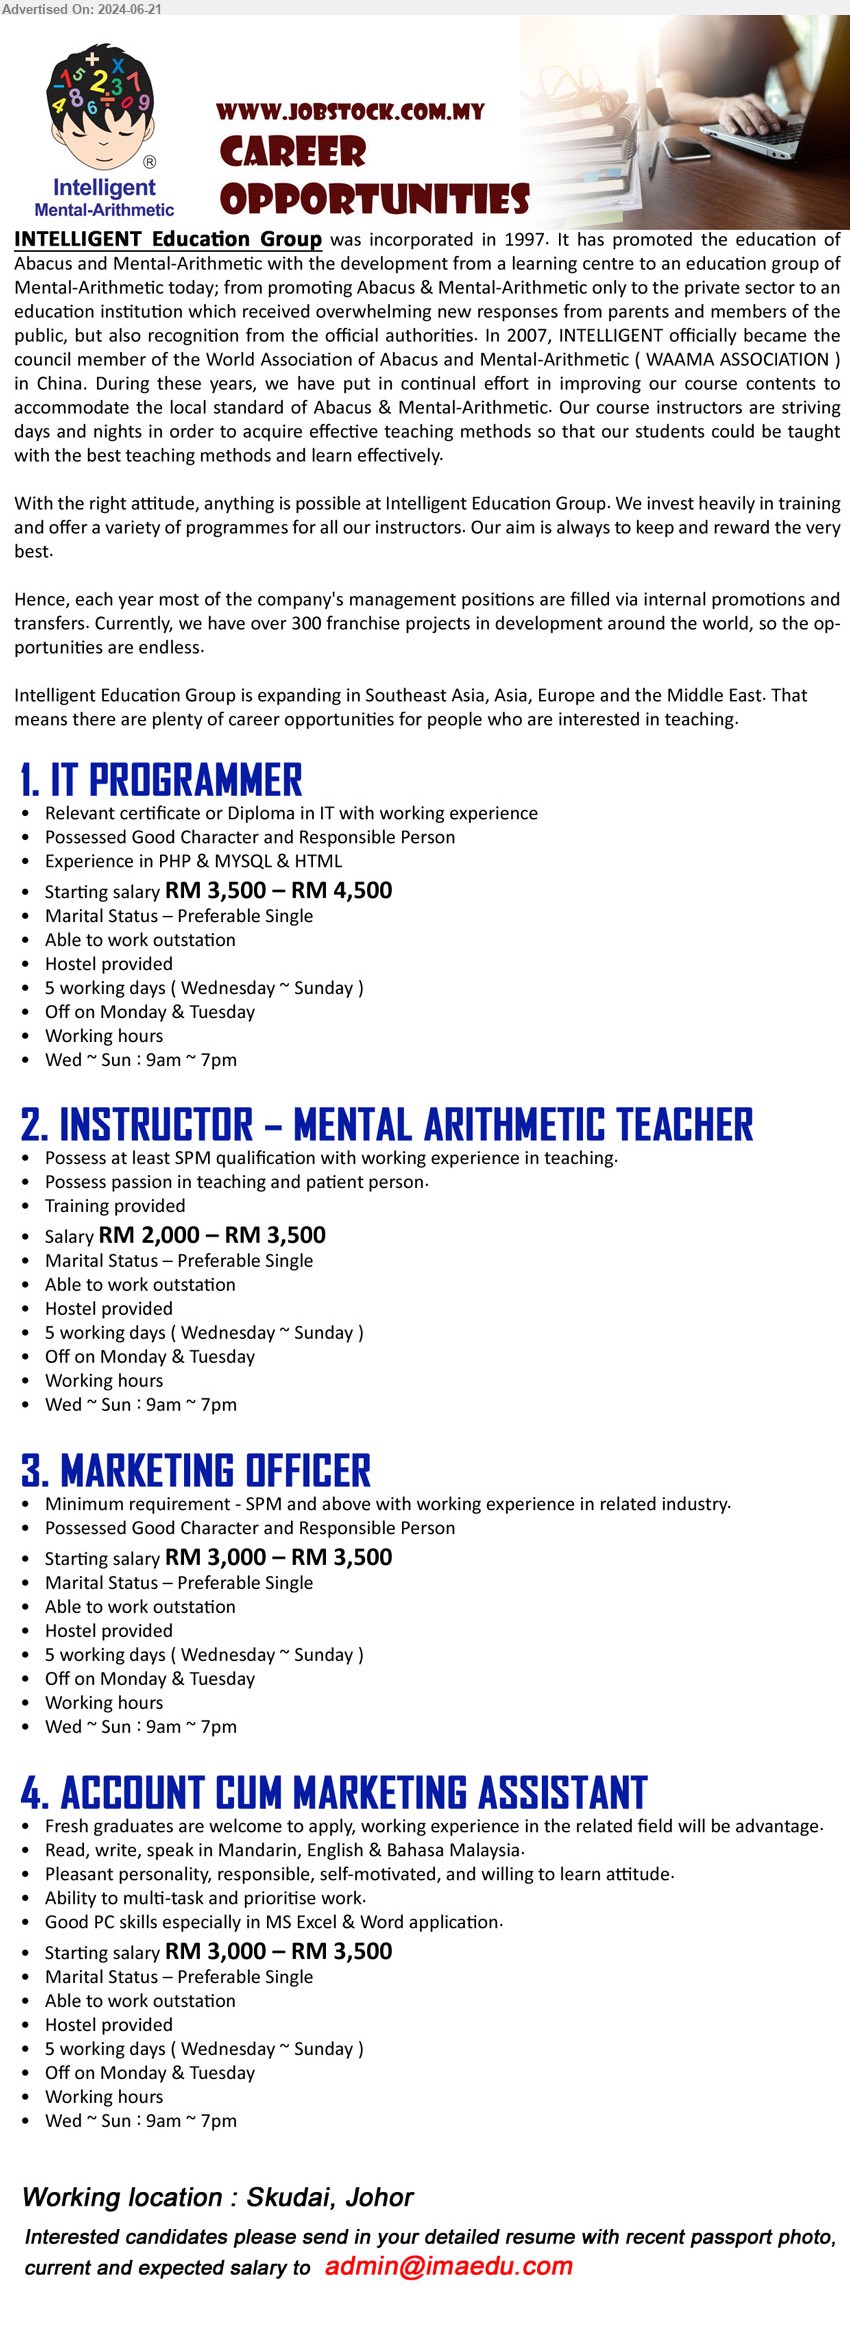 INTELLIGENT MENTAL-ARITHMETIC - 1. IT PROGRAMMER (Skudai, Johor), RM 3,500 – RM 4,500, Certificate or Diploma in IT with working experience Experience in PHP & MYSQL & HTML,...
2. INSTRUCTOR – MENTAL ARITHMETIC TEACHER (Skudai, Johor), RM 2,000 – RM 3,500, SPM qualification with working experience in teaching.,...
3. MARKETING OFFICER (Skudai, Johor), RM 3,000 – RM 3,500, SPM and above with working experience in related industry,...
4. ACCOUNT CUM MARKETING ASSISTANT (Skudai, Johor), RM 3,000 – RM 3,500, Good PC skills especially in MS Excel & Word application.,...
Email resume to ...